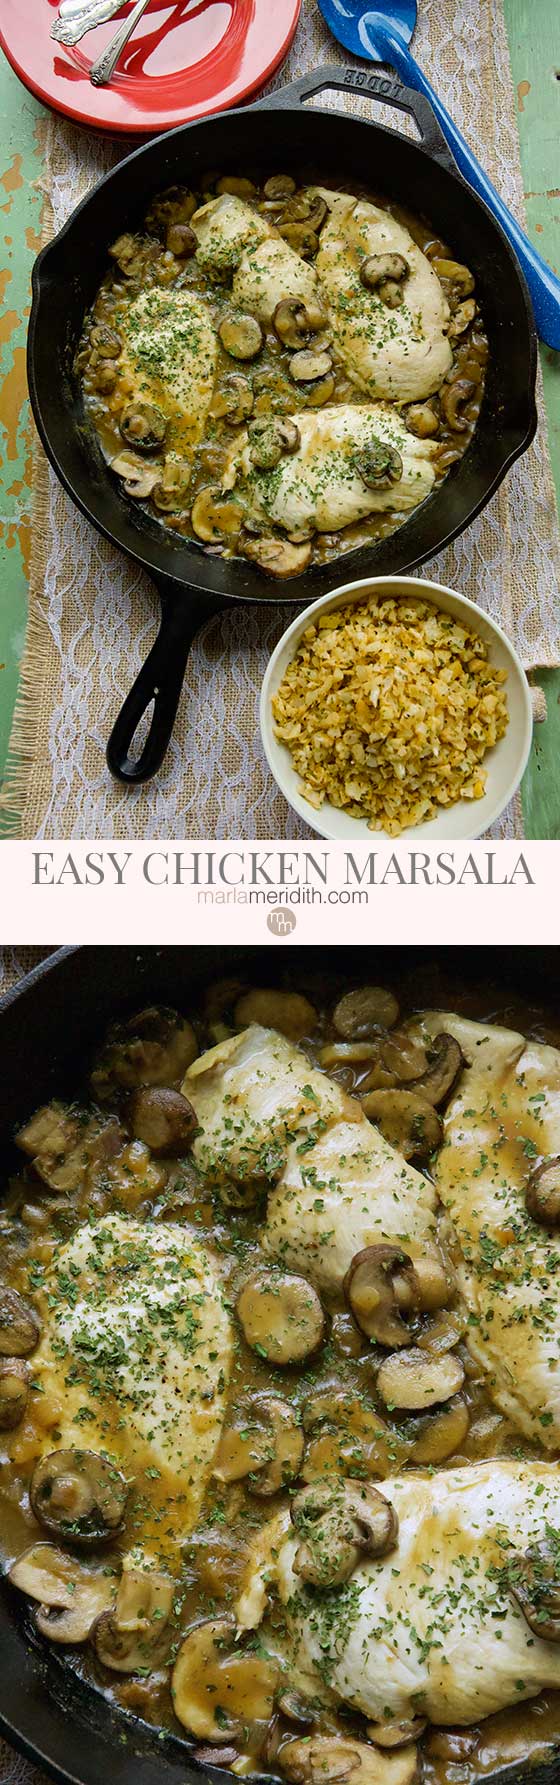 We love this easy Chicken Marsala recipe, it's great for weeknights or entertaining. A healthy, flavor packed Italian-American dish. MarlaMeridith.com